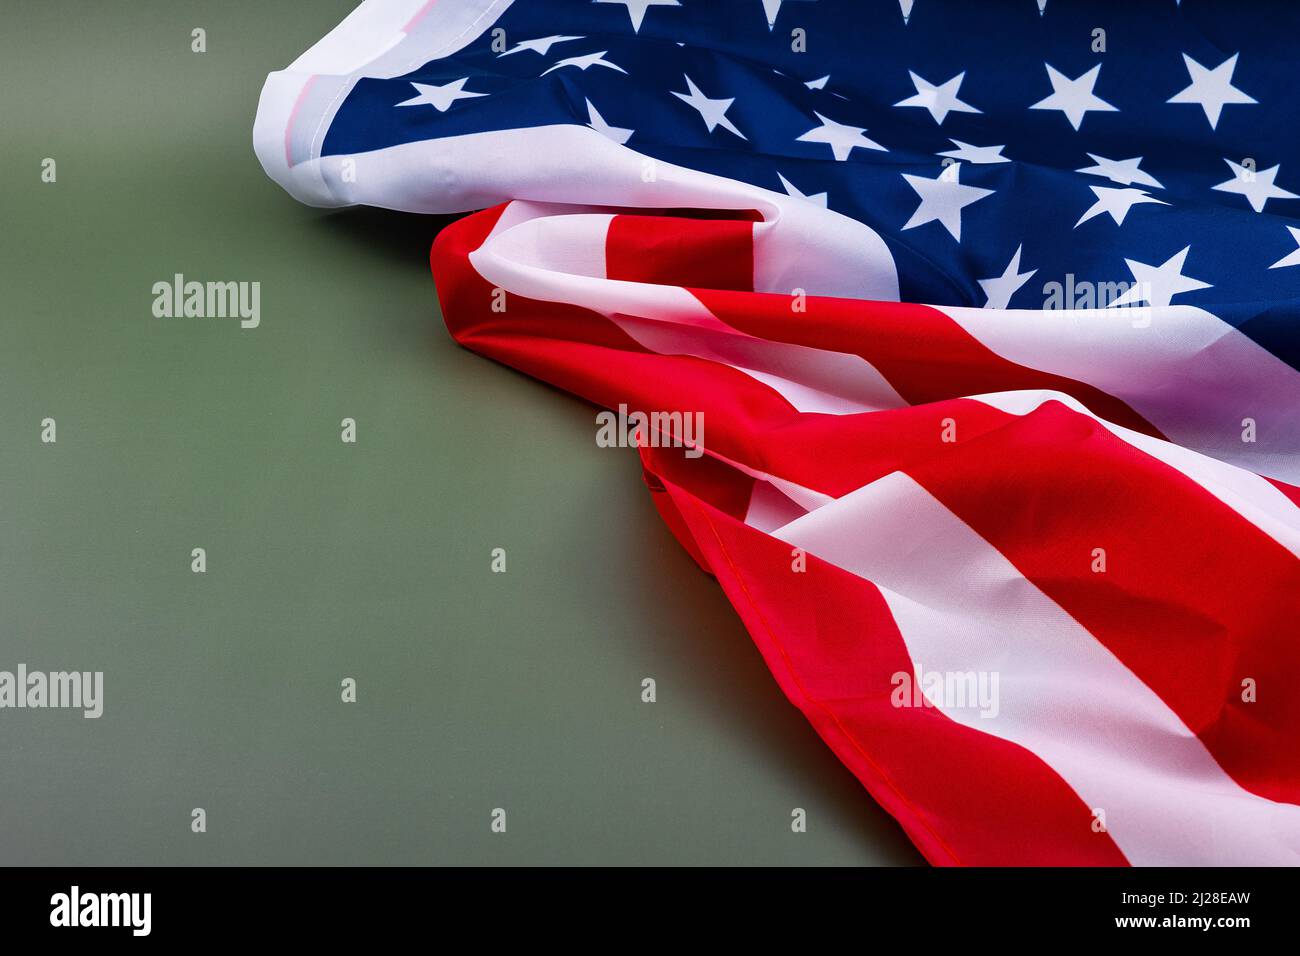 United States flag on a green background, a flag of the United States, against an olive green background with a blank on the left side Stock Photo